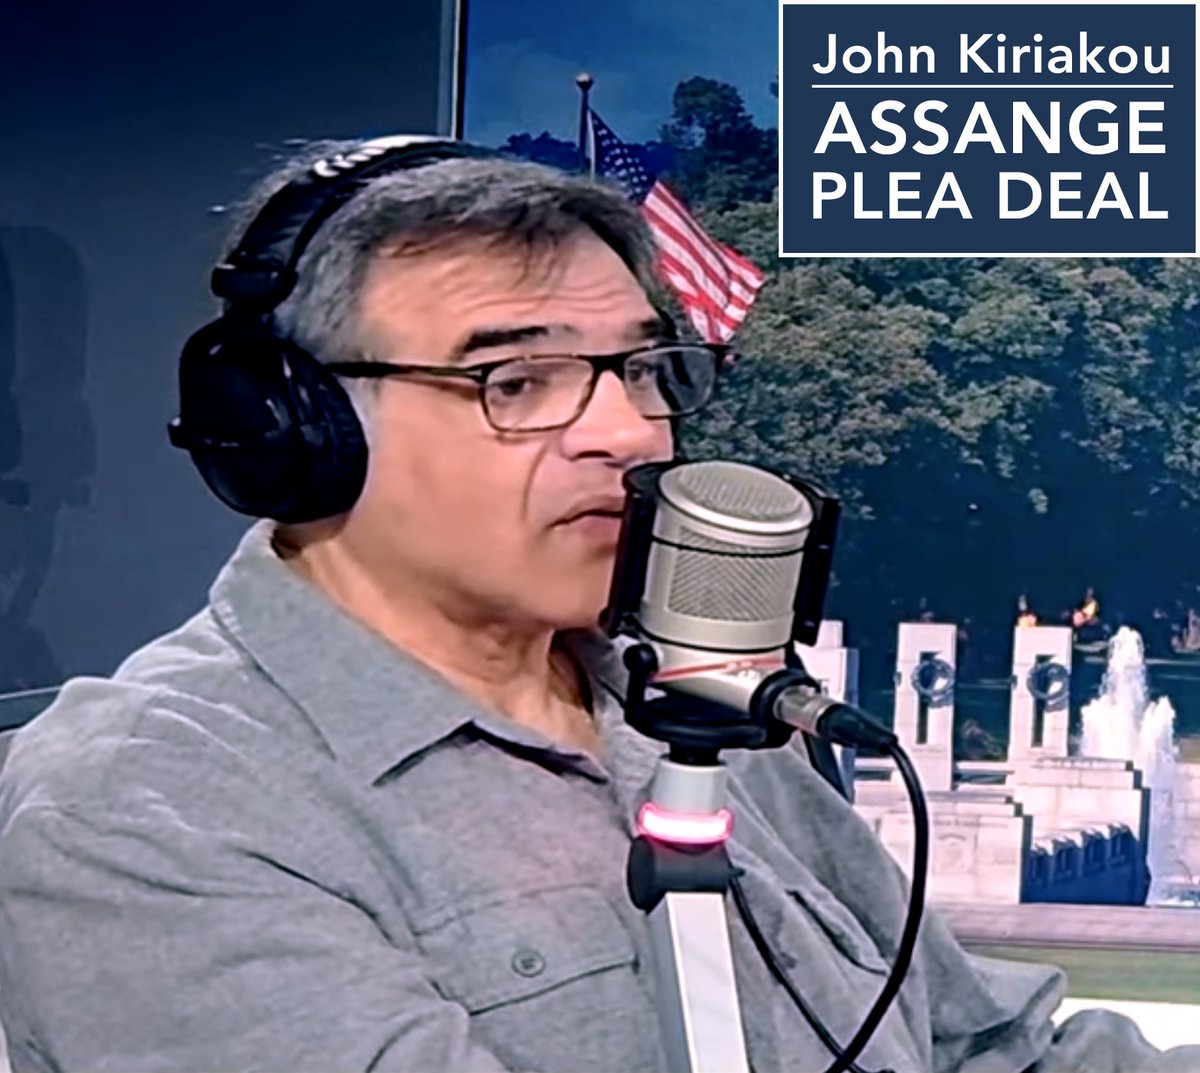 CIA torture whistleblower @JohnKiriakou reveals more about the #Assange plea deal. youtube.com/watch?v=8EcmRR… They wanted him to plead guilty to espionage originally, he says, but Julian wouldn't let that precedent be set for other journalists.